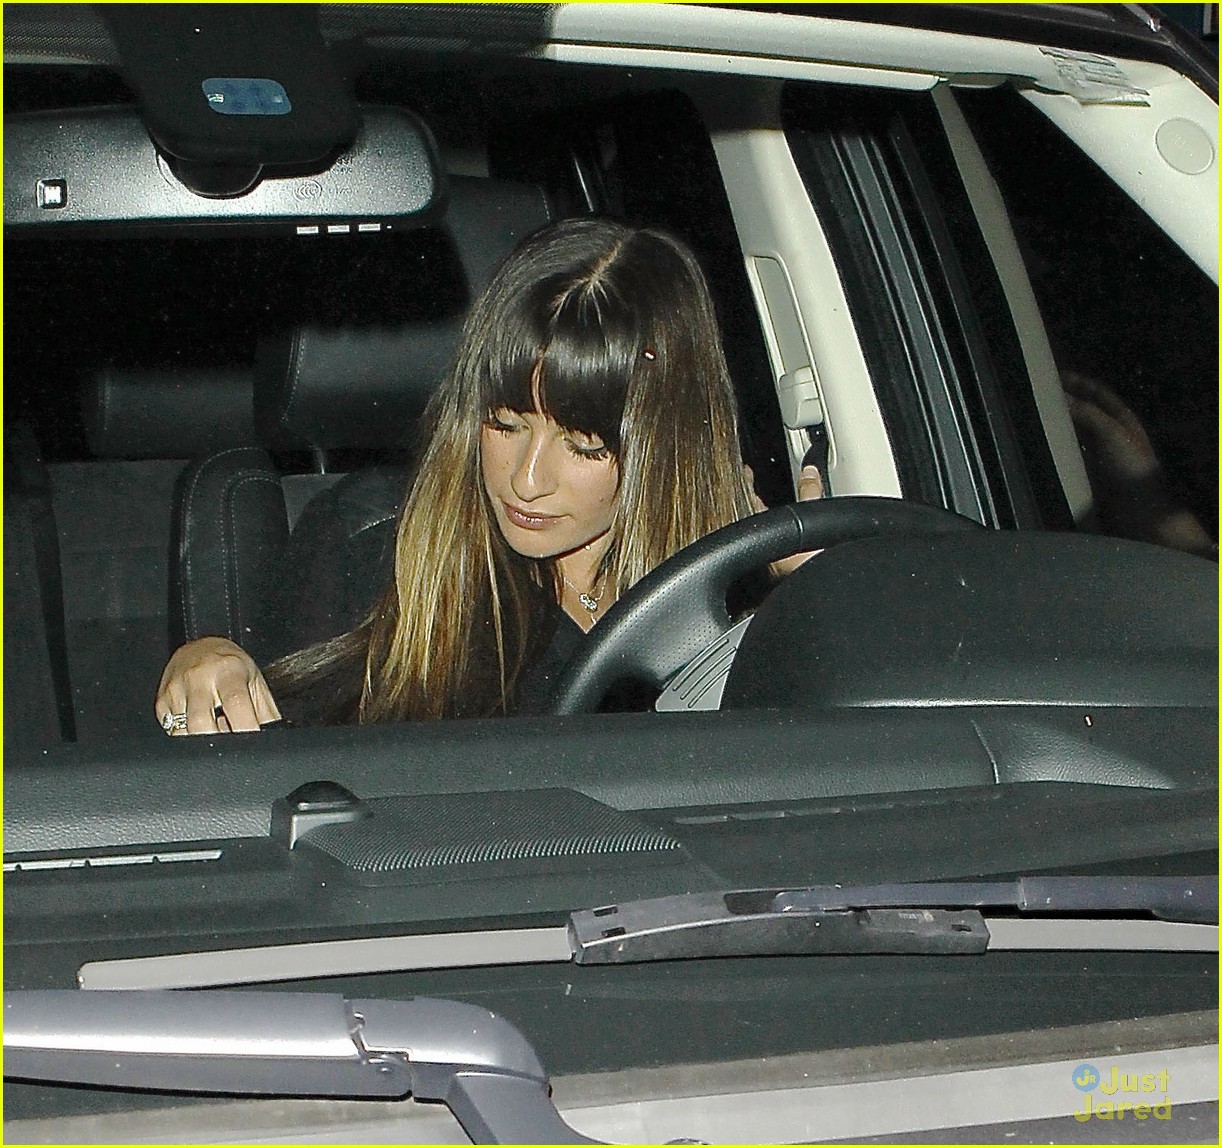 lea michele friends night out in weho 15